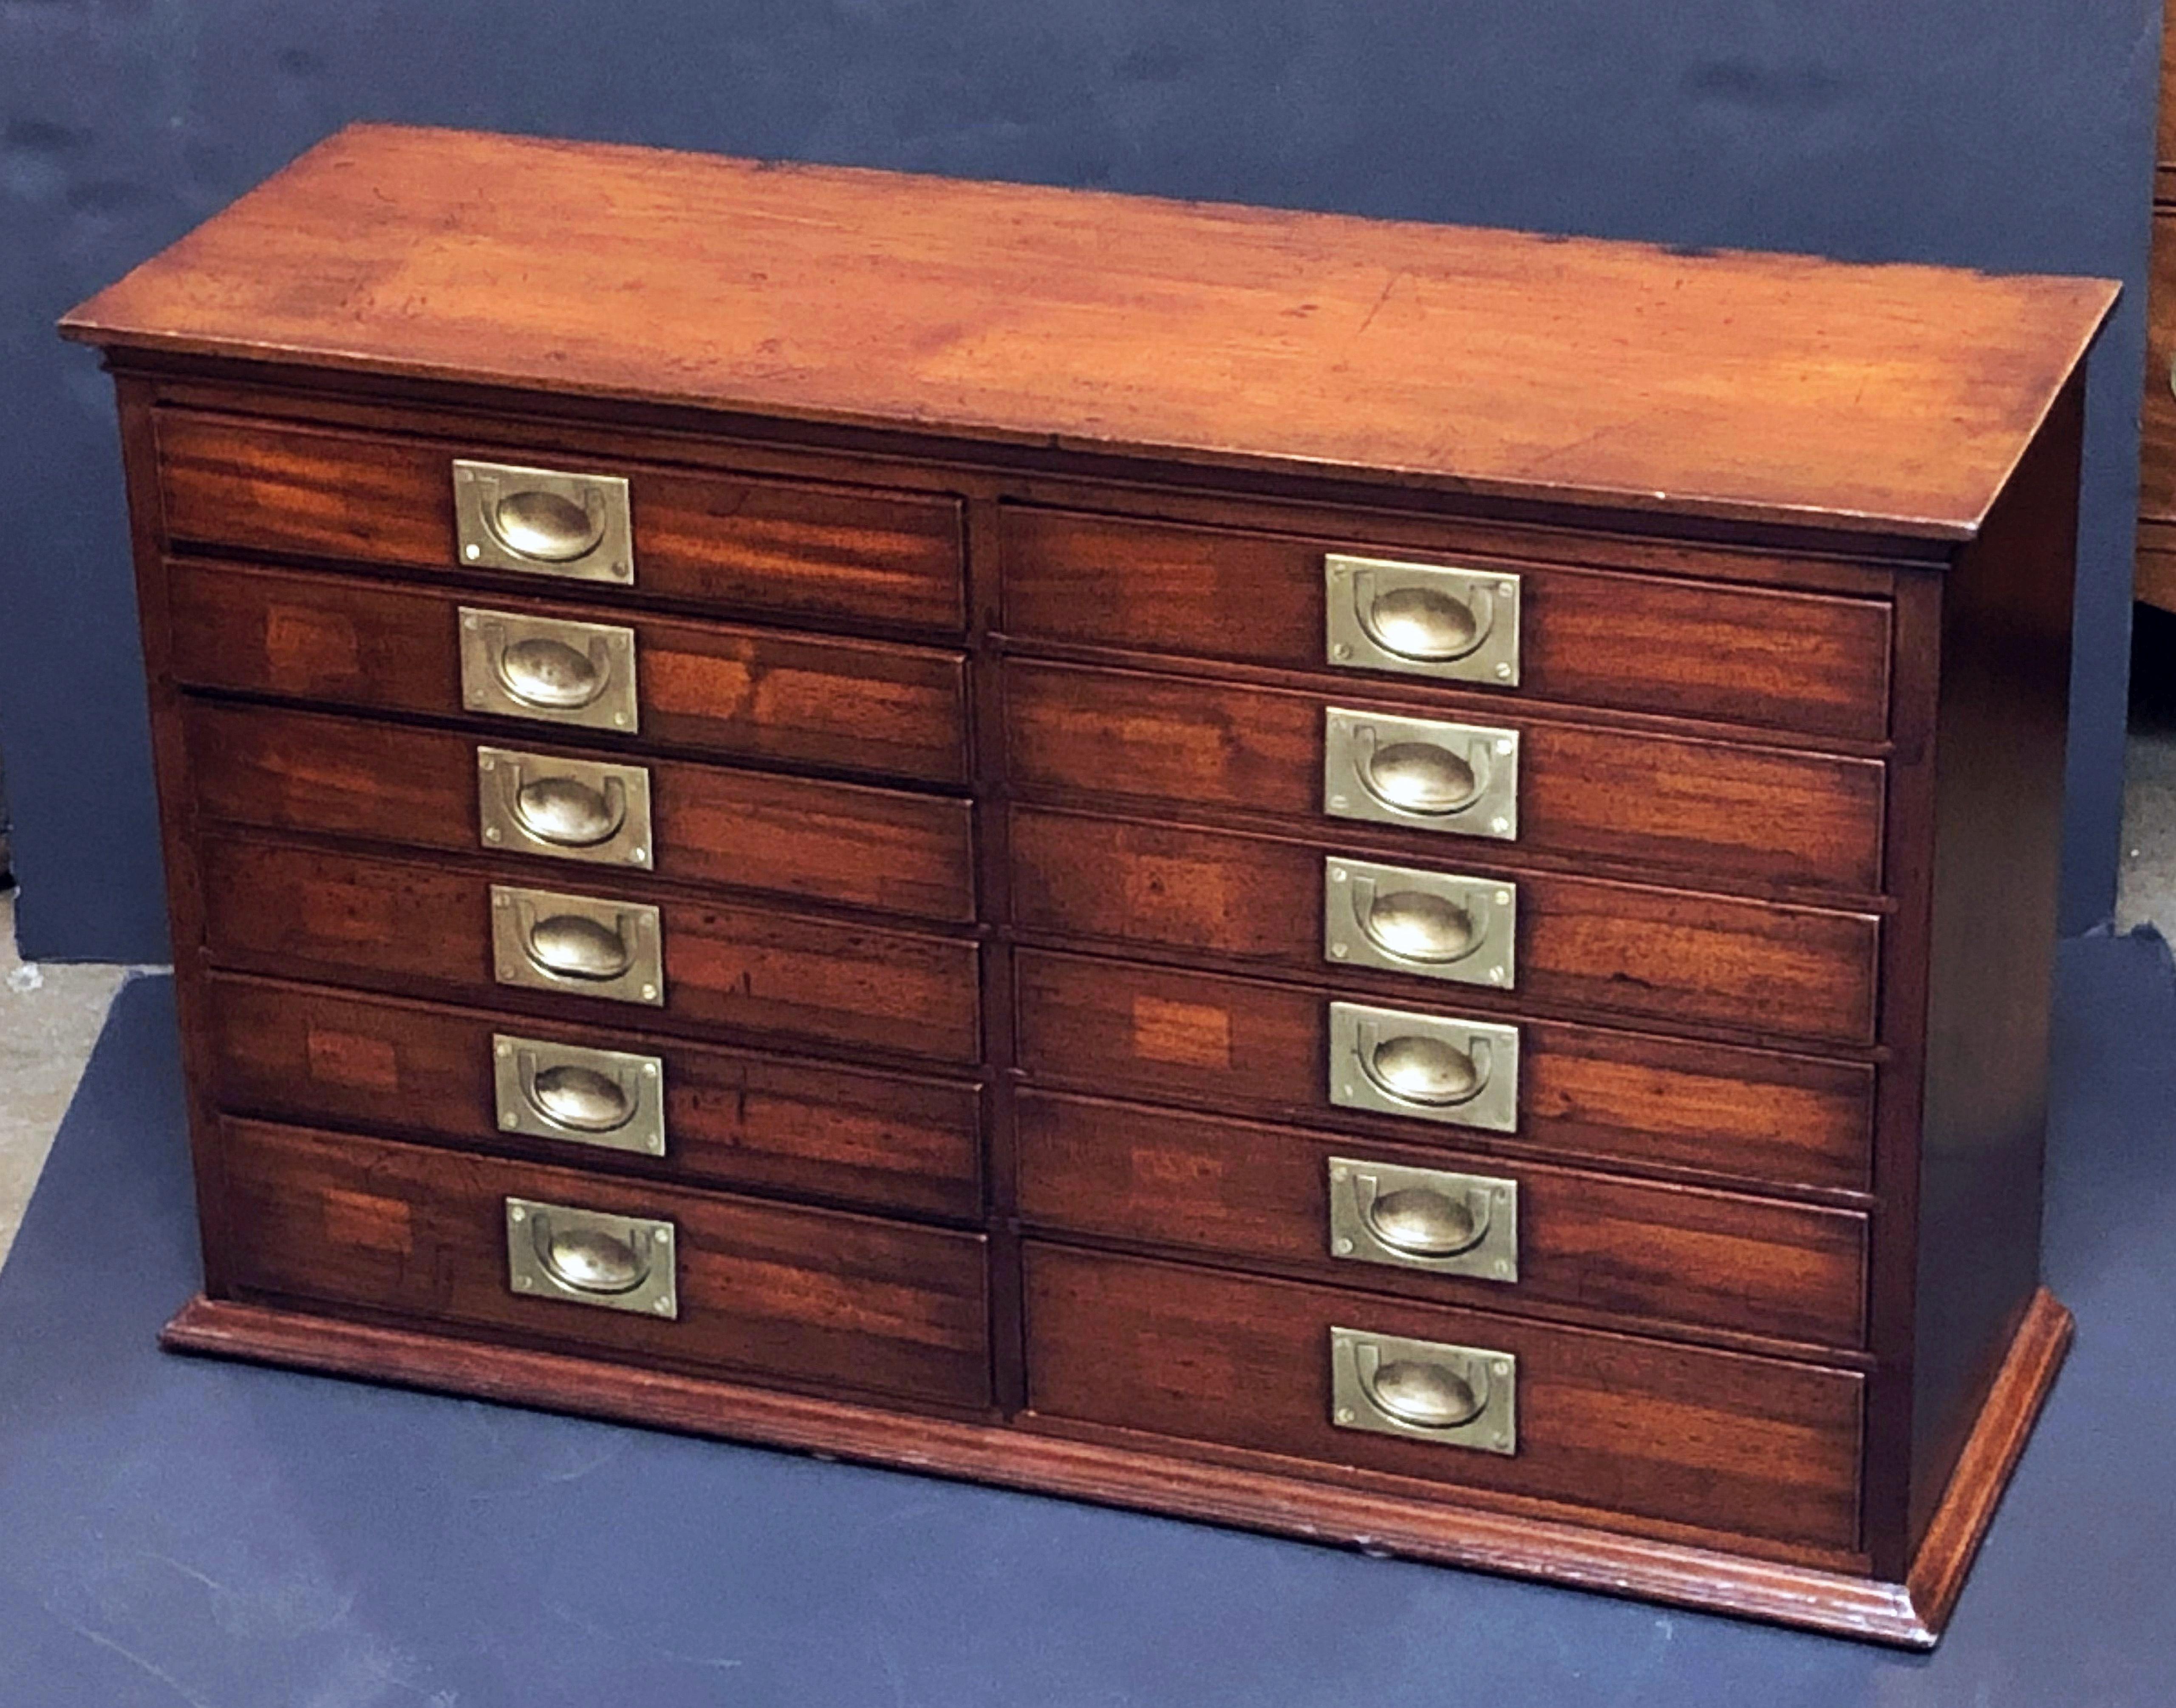 20th Century British Military Campaign Flight of Drawers with Brass Hardware